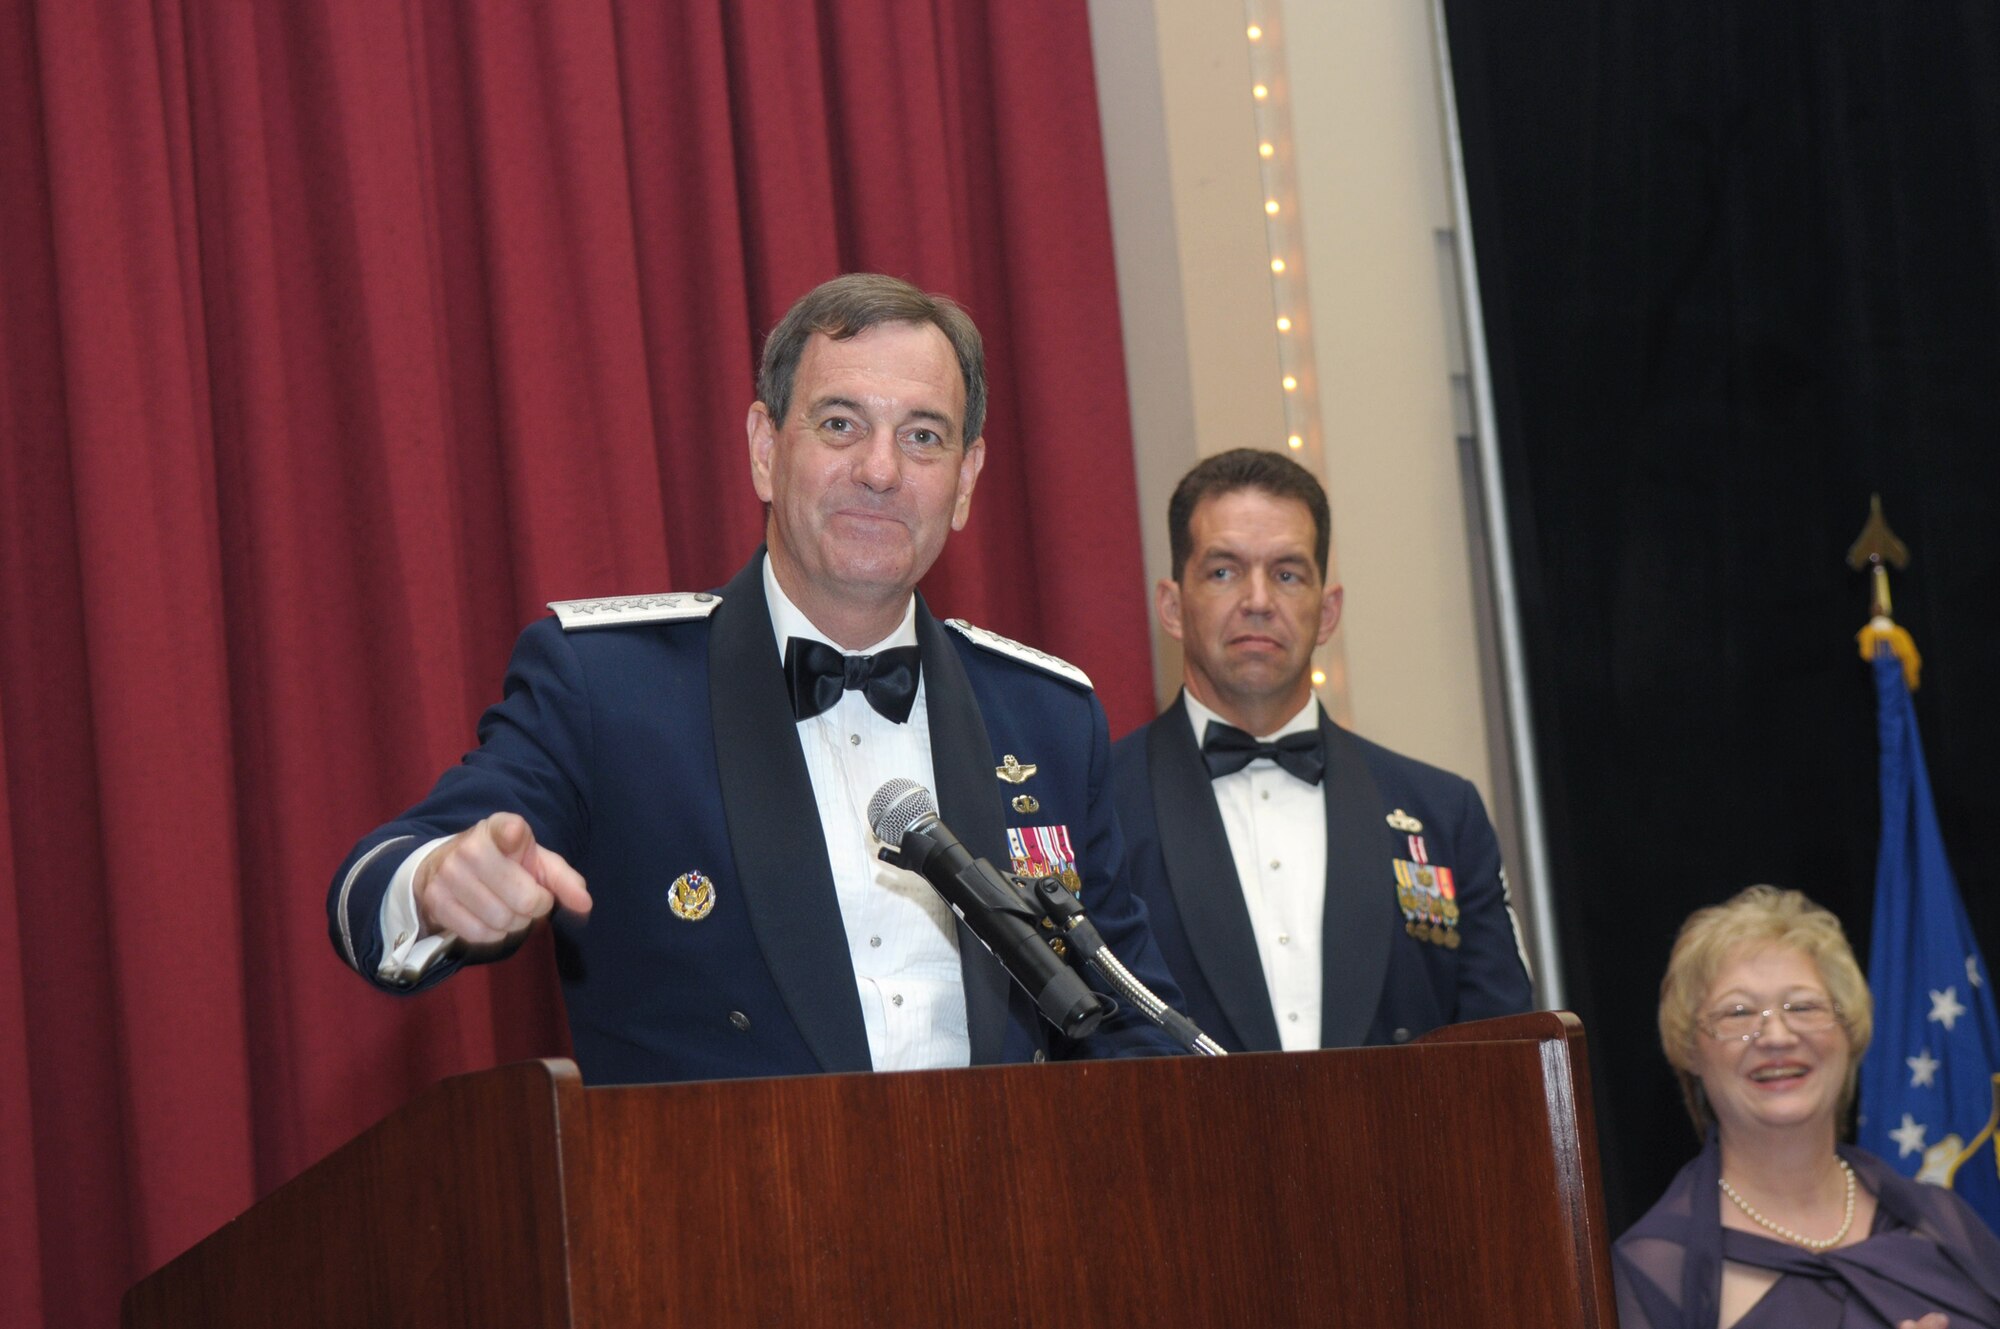 Gen. Stephen R. Lorenz addresses more than 300 AETC Airmen July 16, 2010, during his induction into the Order of Sword at the Gateway Club on Lackland Air Force Base, Texas. General Lorenz is the Air Education and Training Command commander. (U.S. Air Force photo/Joel Martinez)